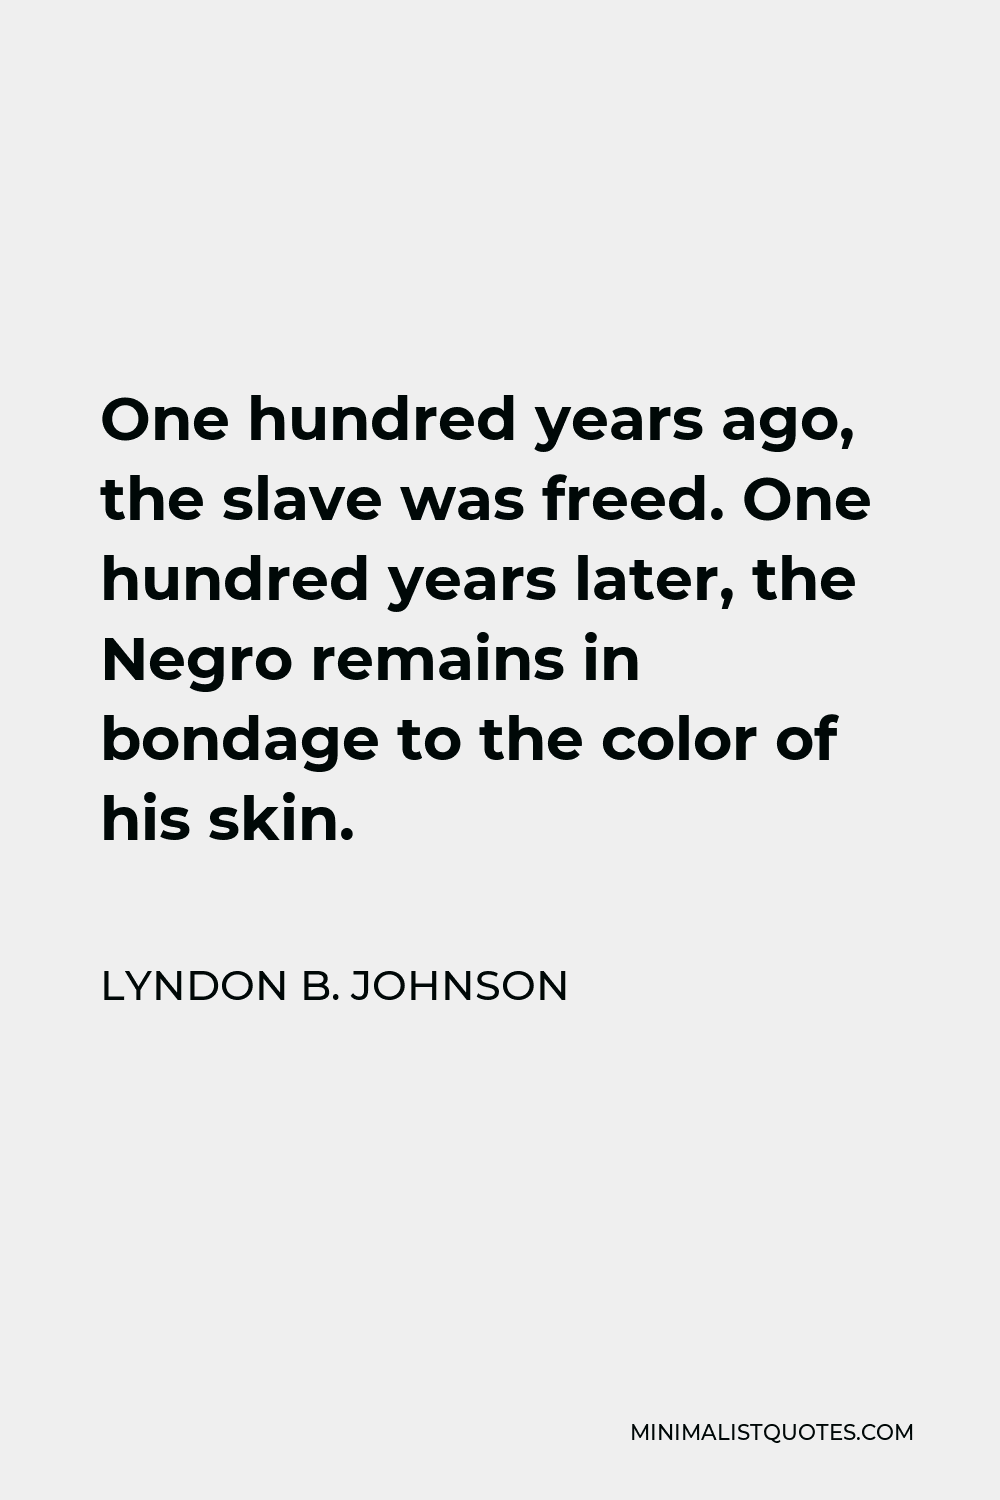 Lyndon B. Johnson Quote - One hundred years ago, the slave was freed. One hundred years later, the Negro remains in bondage to the color of his skin.